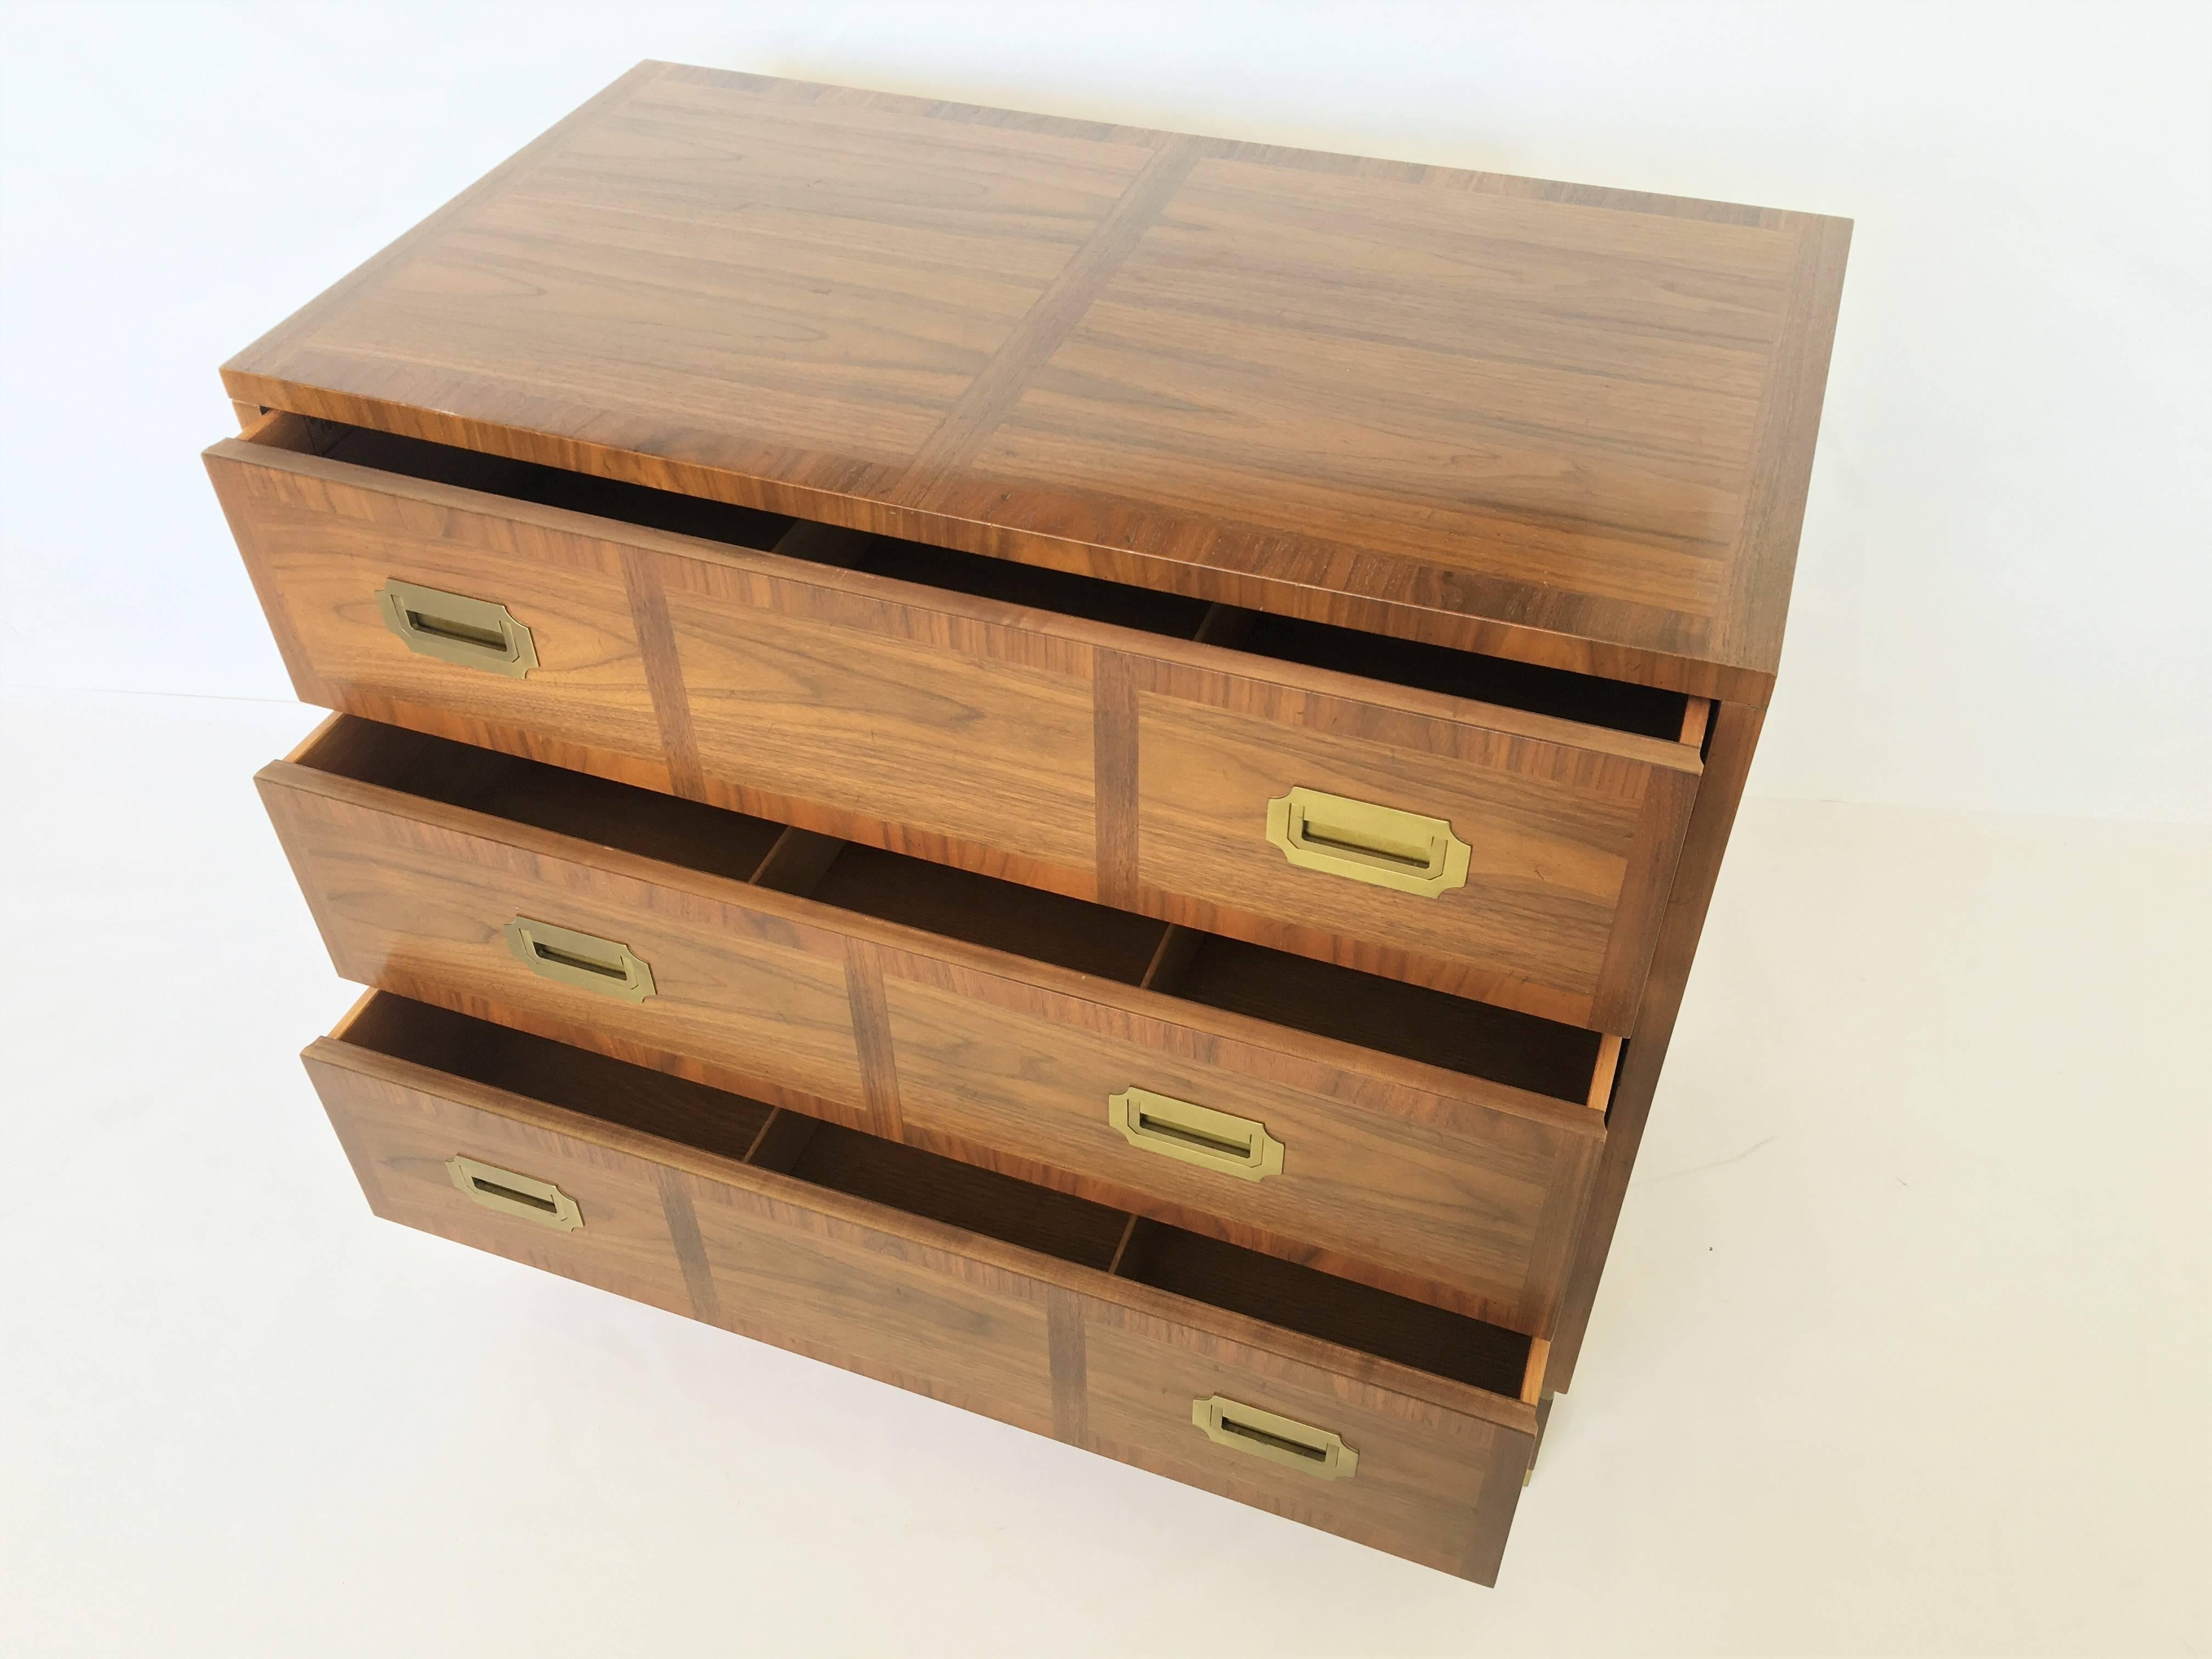 Pair of vintage Mid-Century Modern Campaign style milling road bachelors chests by Baker with Classic simple form. Each chest features a very nice Hollywood Regency/Campaign style design with striking, figured wood grain, three dovetailed banded